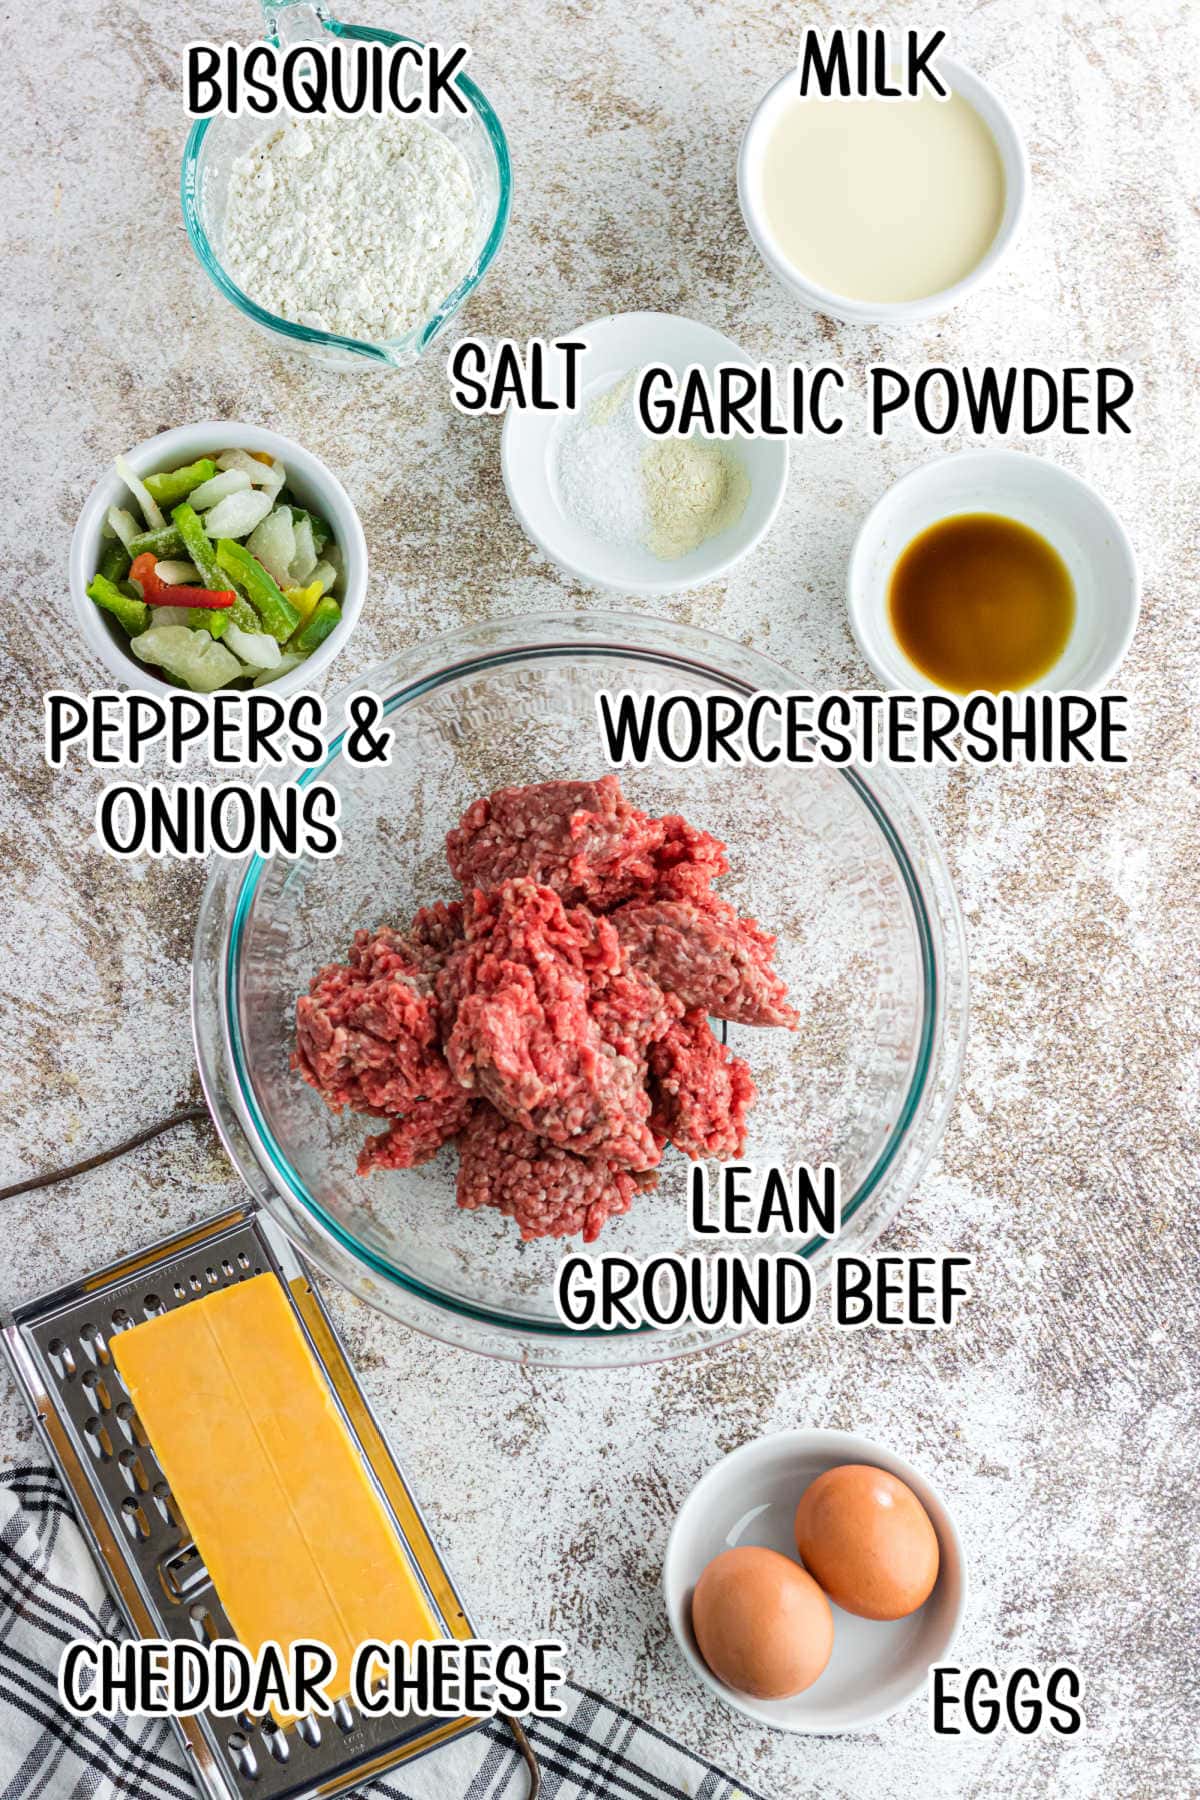 Labeled ingredients for Bisquick cheeseburger pie.